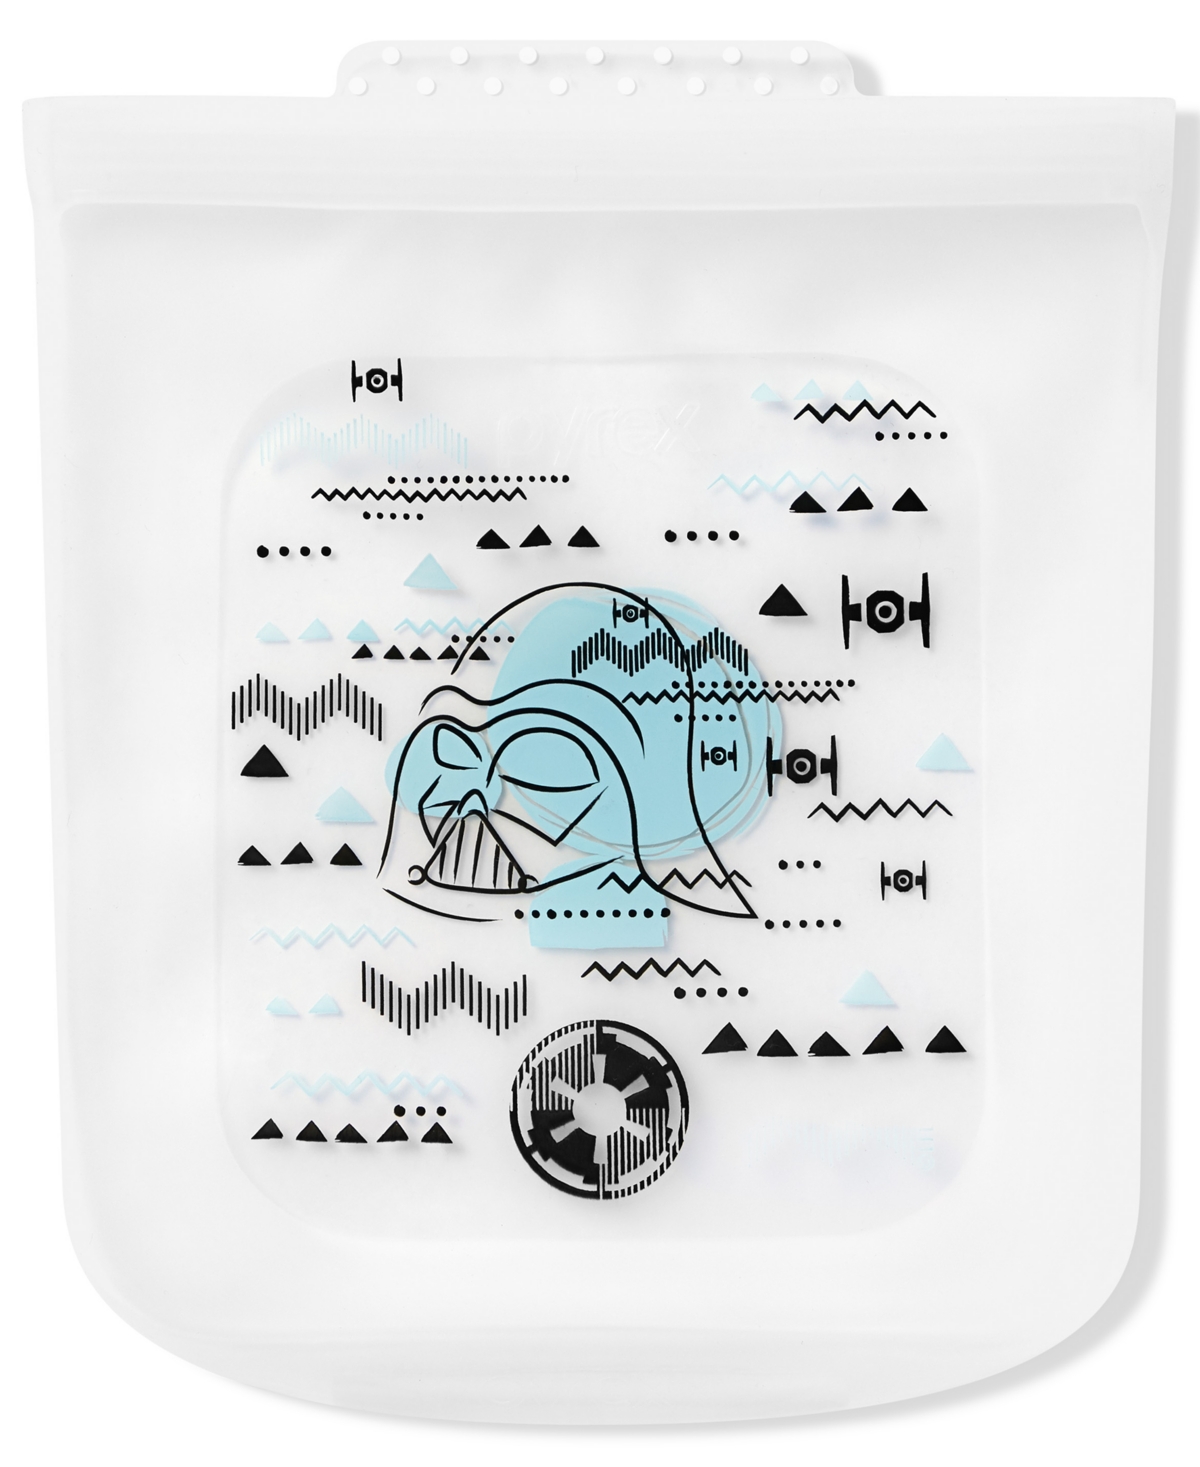 Pyrex Star Wars 4-Pc. Food Storage Container Set - Macy's